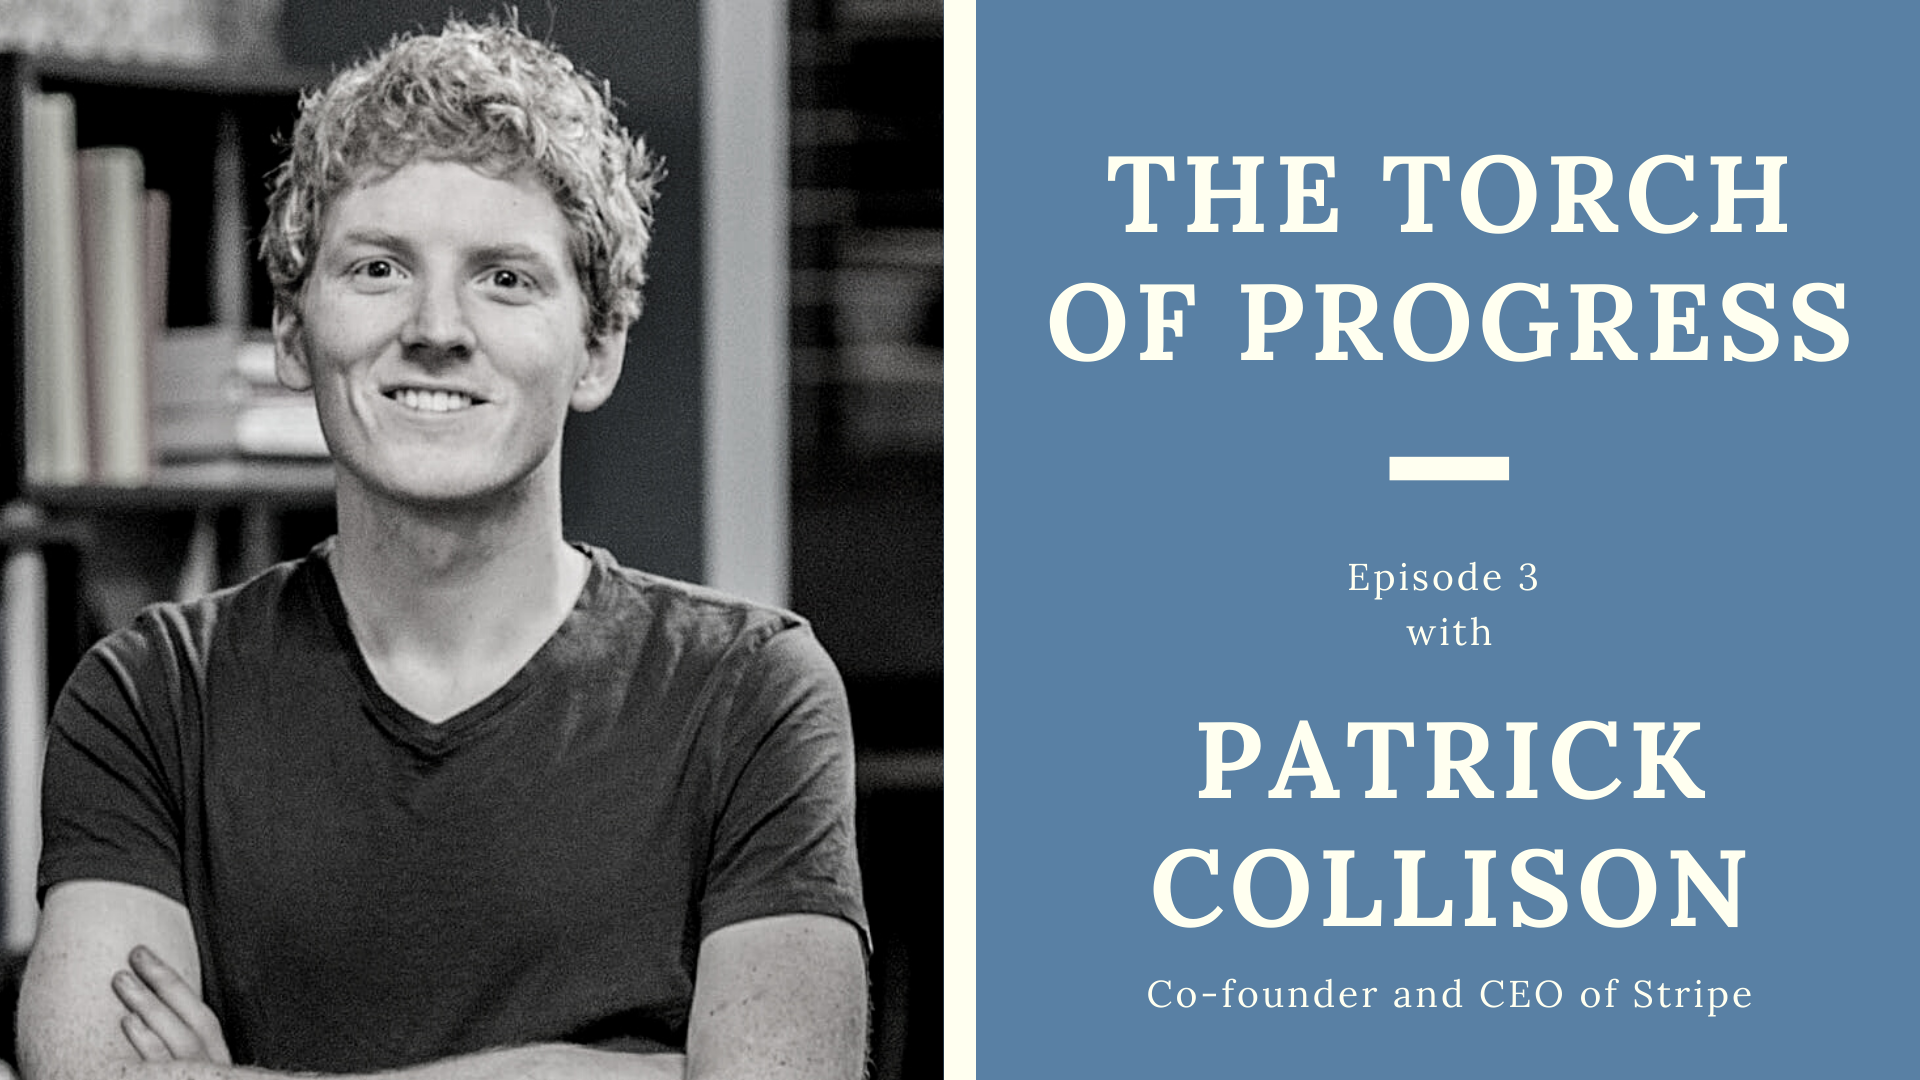 The Torch of Progress, Ep. 3 with Patrick Collison